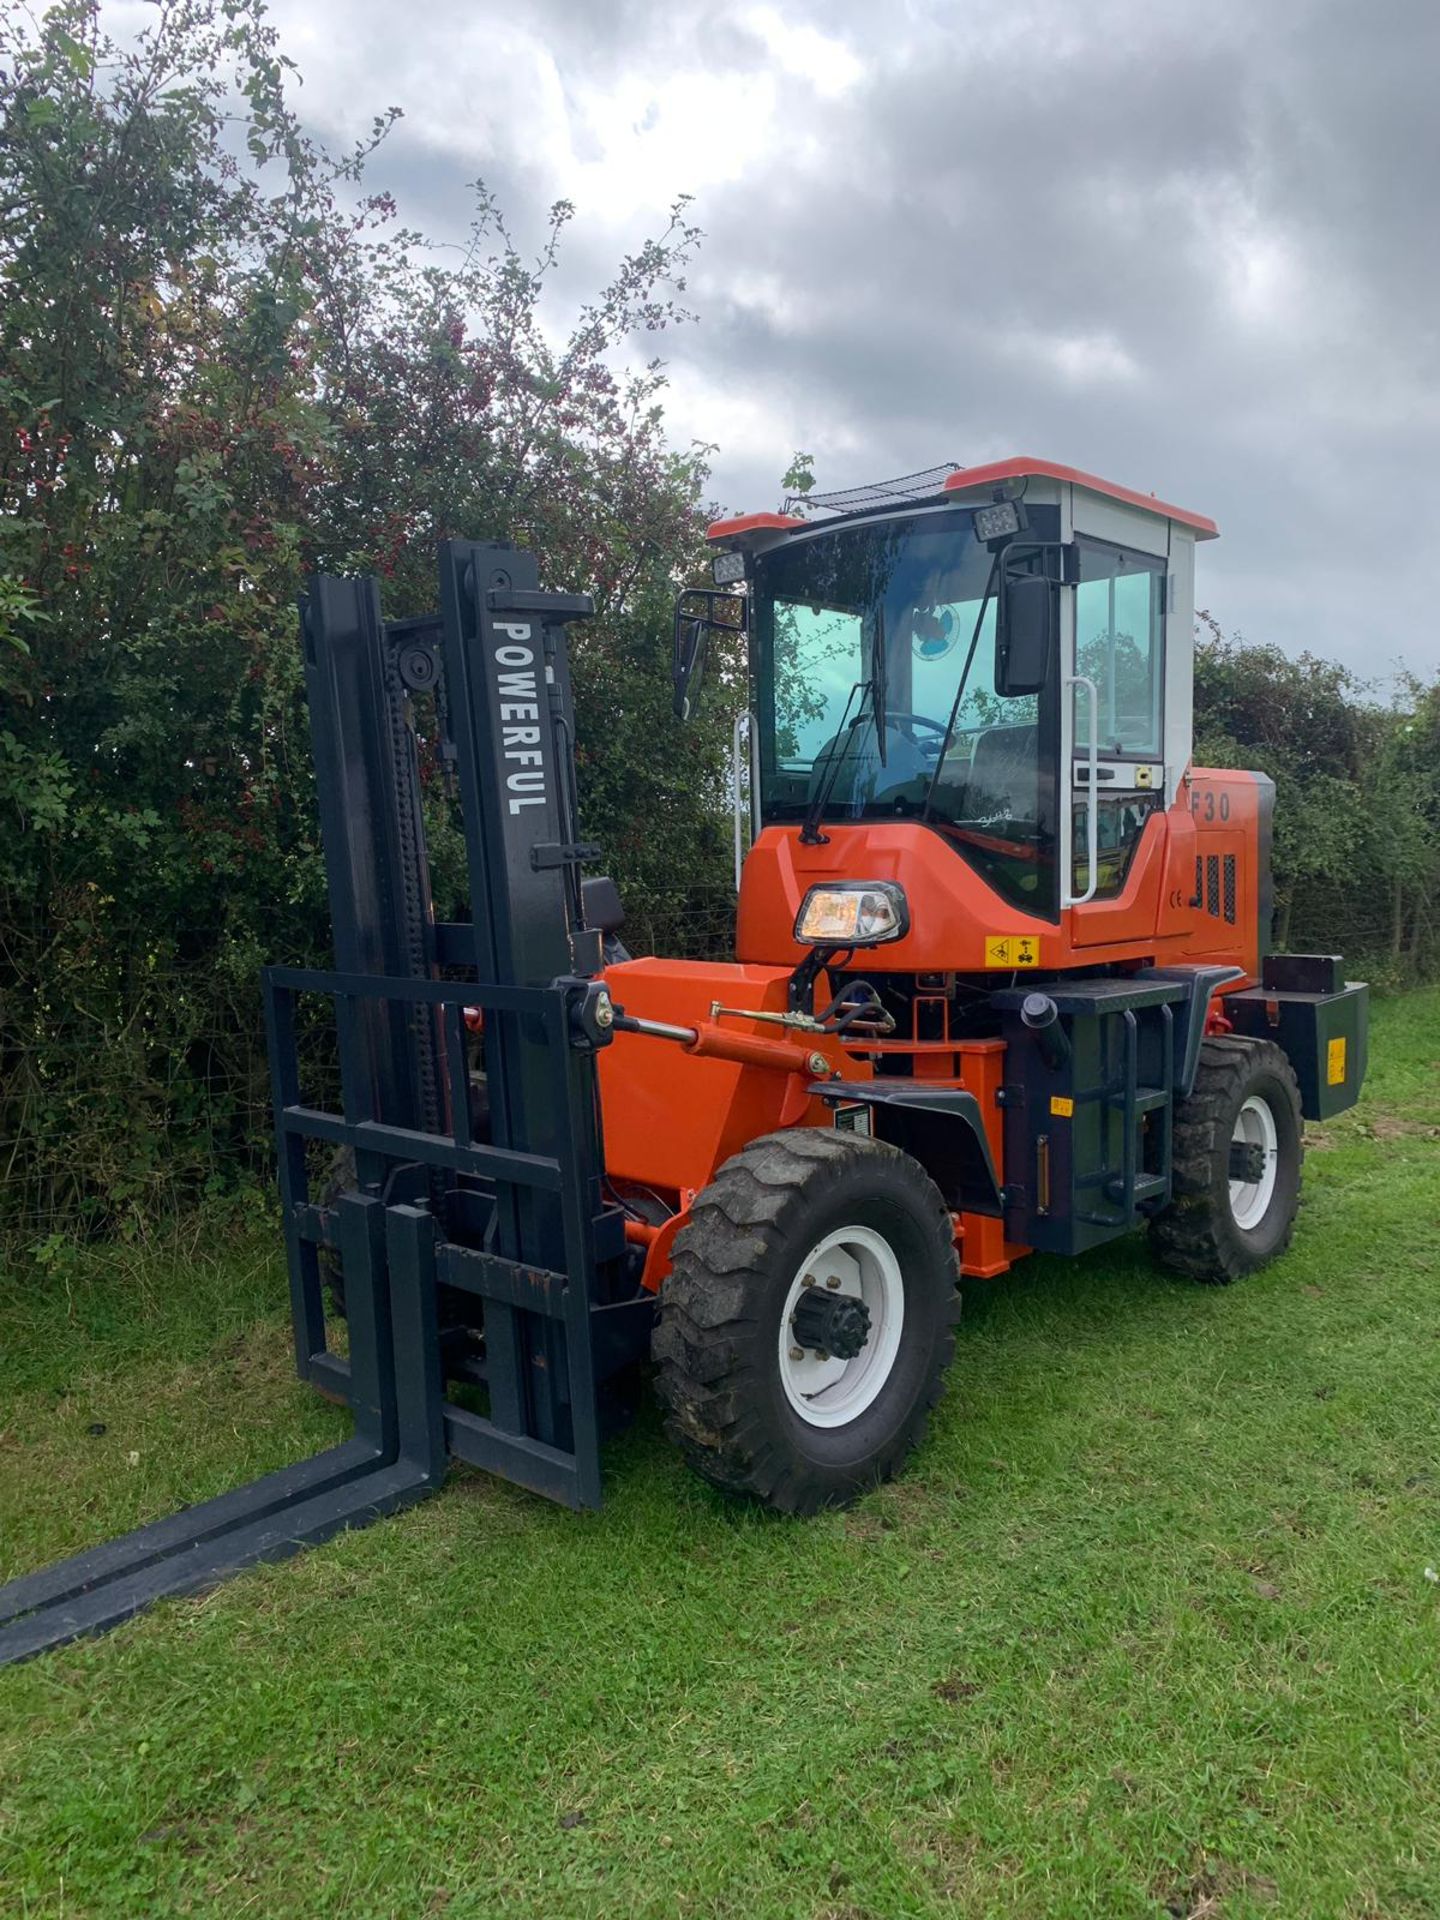 BRAND NEW 2019 ATTACK PF30 4X4 ROUGH TERRAIN POWERFUL FORKLIFT C/W 2 STAGE MAST *PLUS VAT* - Image 6 of 12